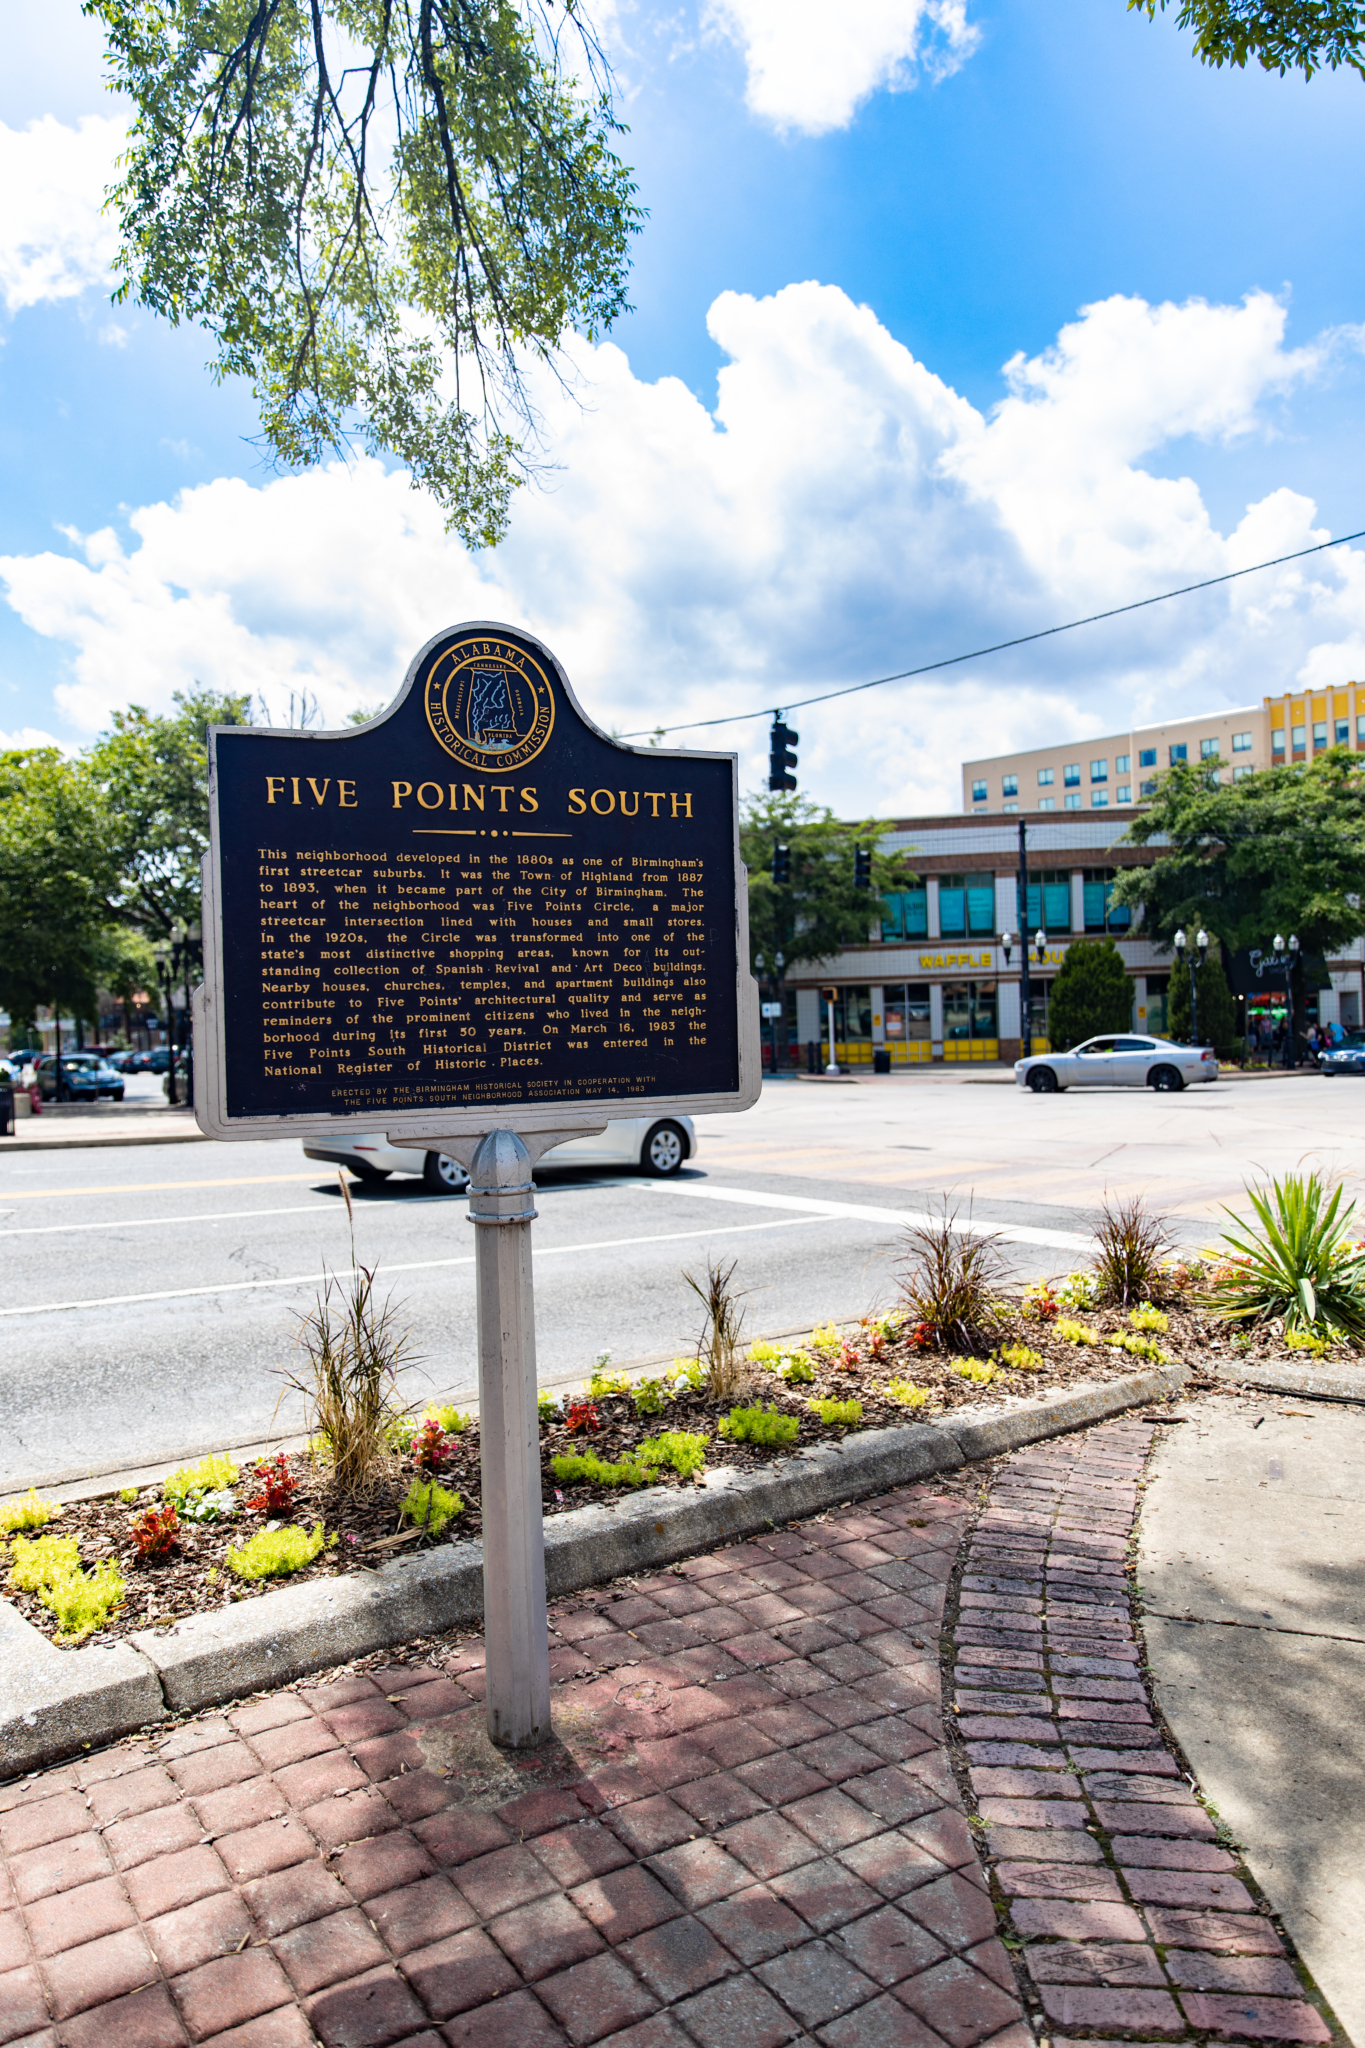 Five Points South 2 New Cortland Vesta apartments offer unbeatable access to the heart of Five Points South